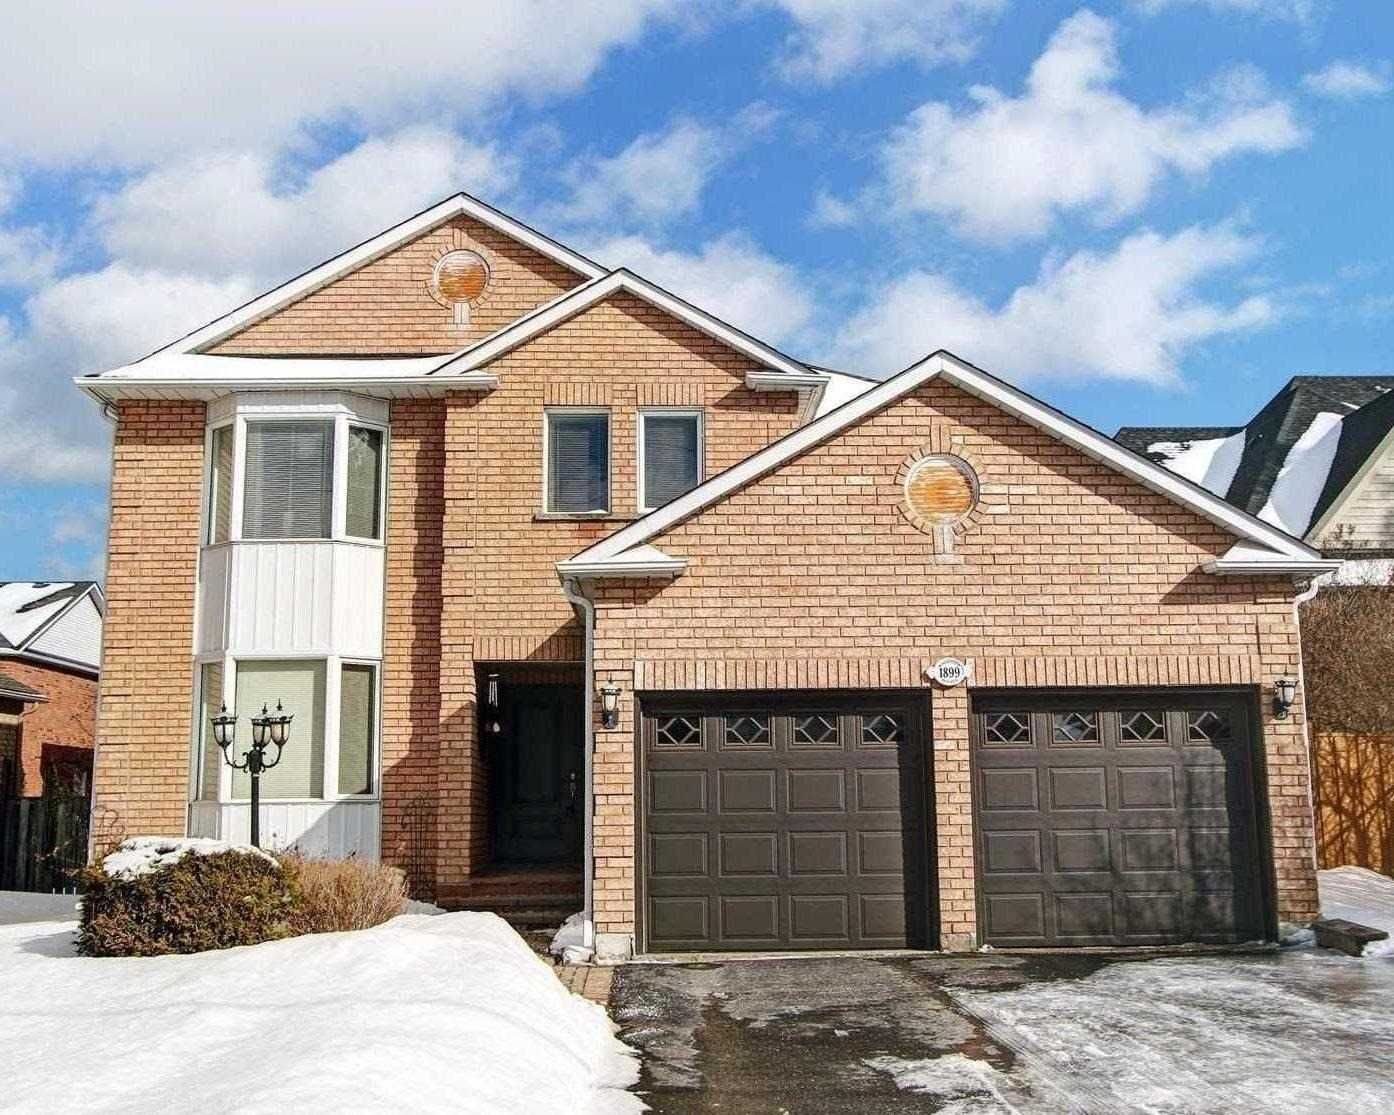 Main Photo: 1899 Woodview Ave in Pickering: Freehold for sale : MLS®# E4359146